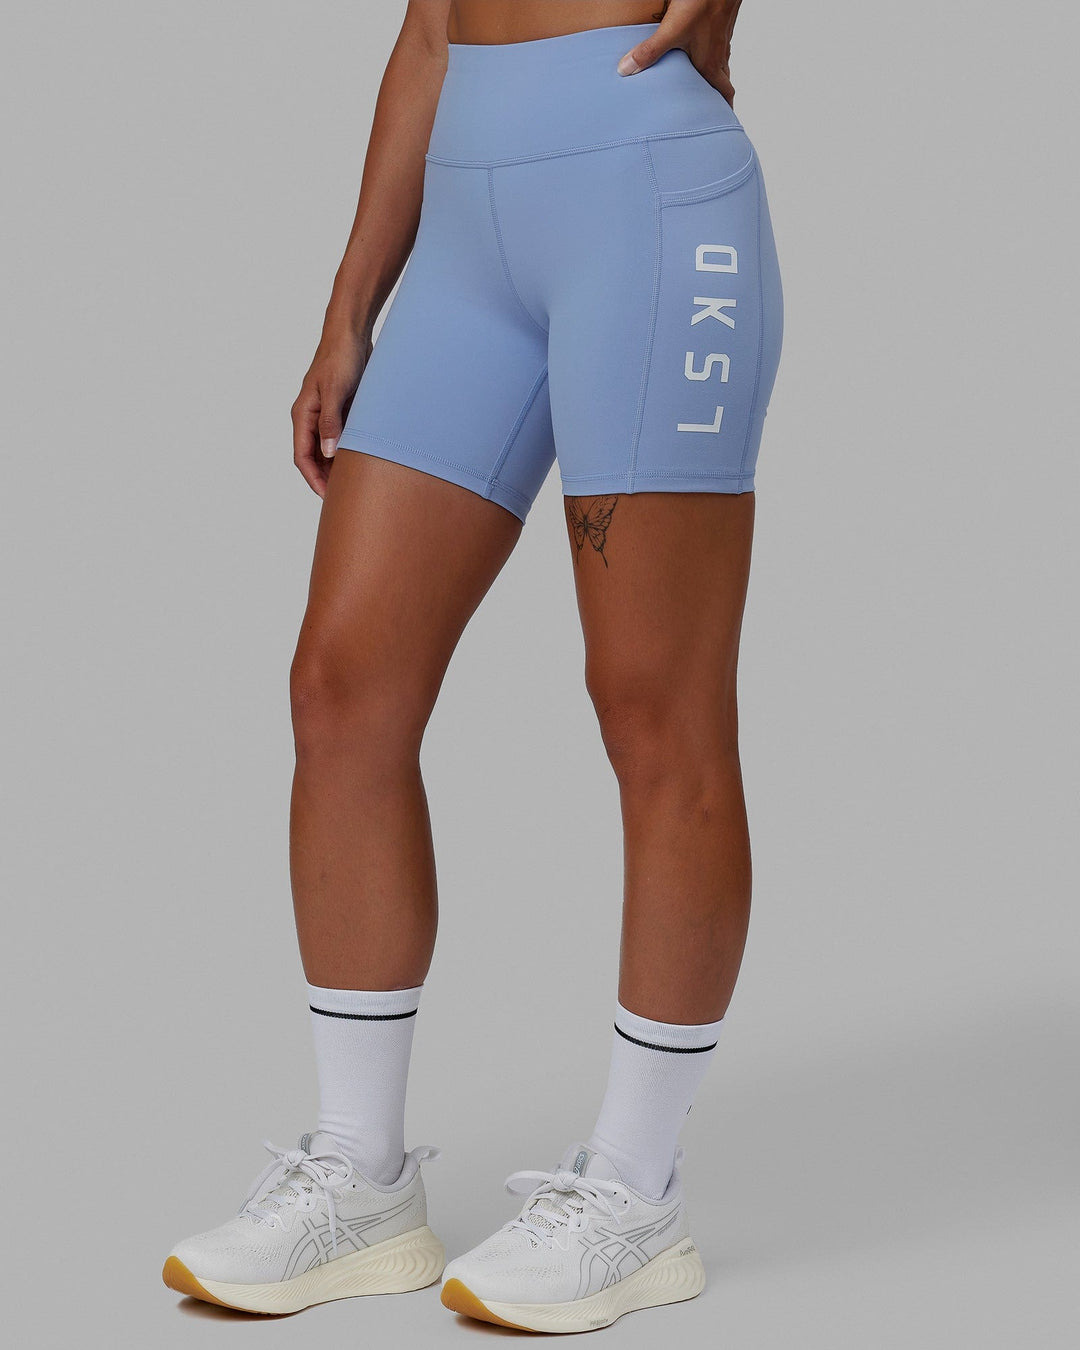 Woman wearing Rep Mid Short Tight - Arctic Blue-White